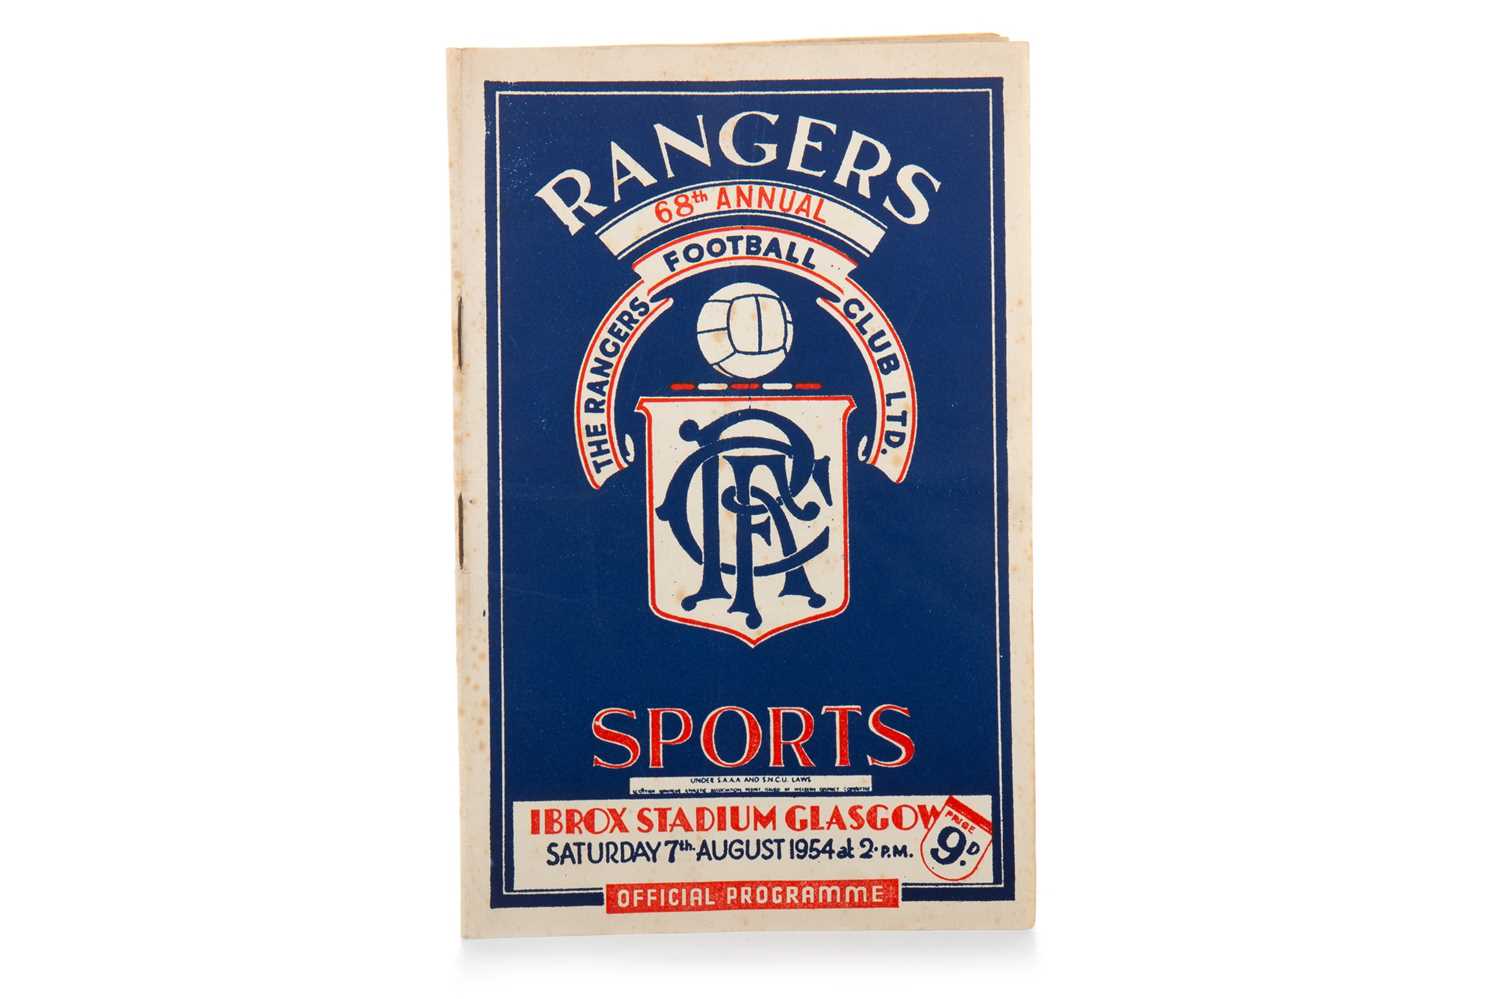 Lot 1682 - RANGERS F.C., 68TH ANNUAL SPORTS DAY, PROGRAMME